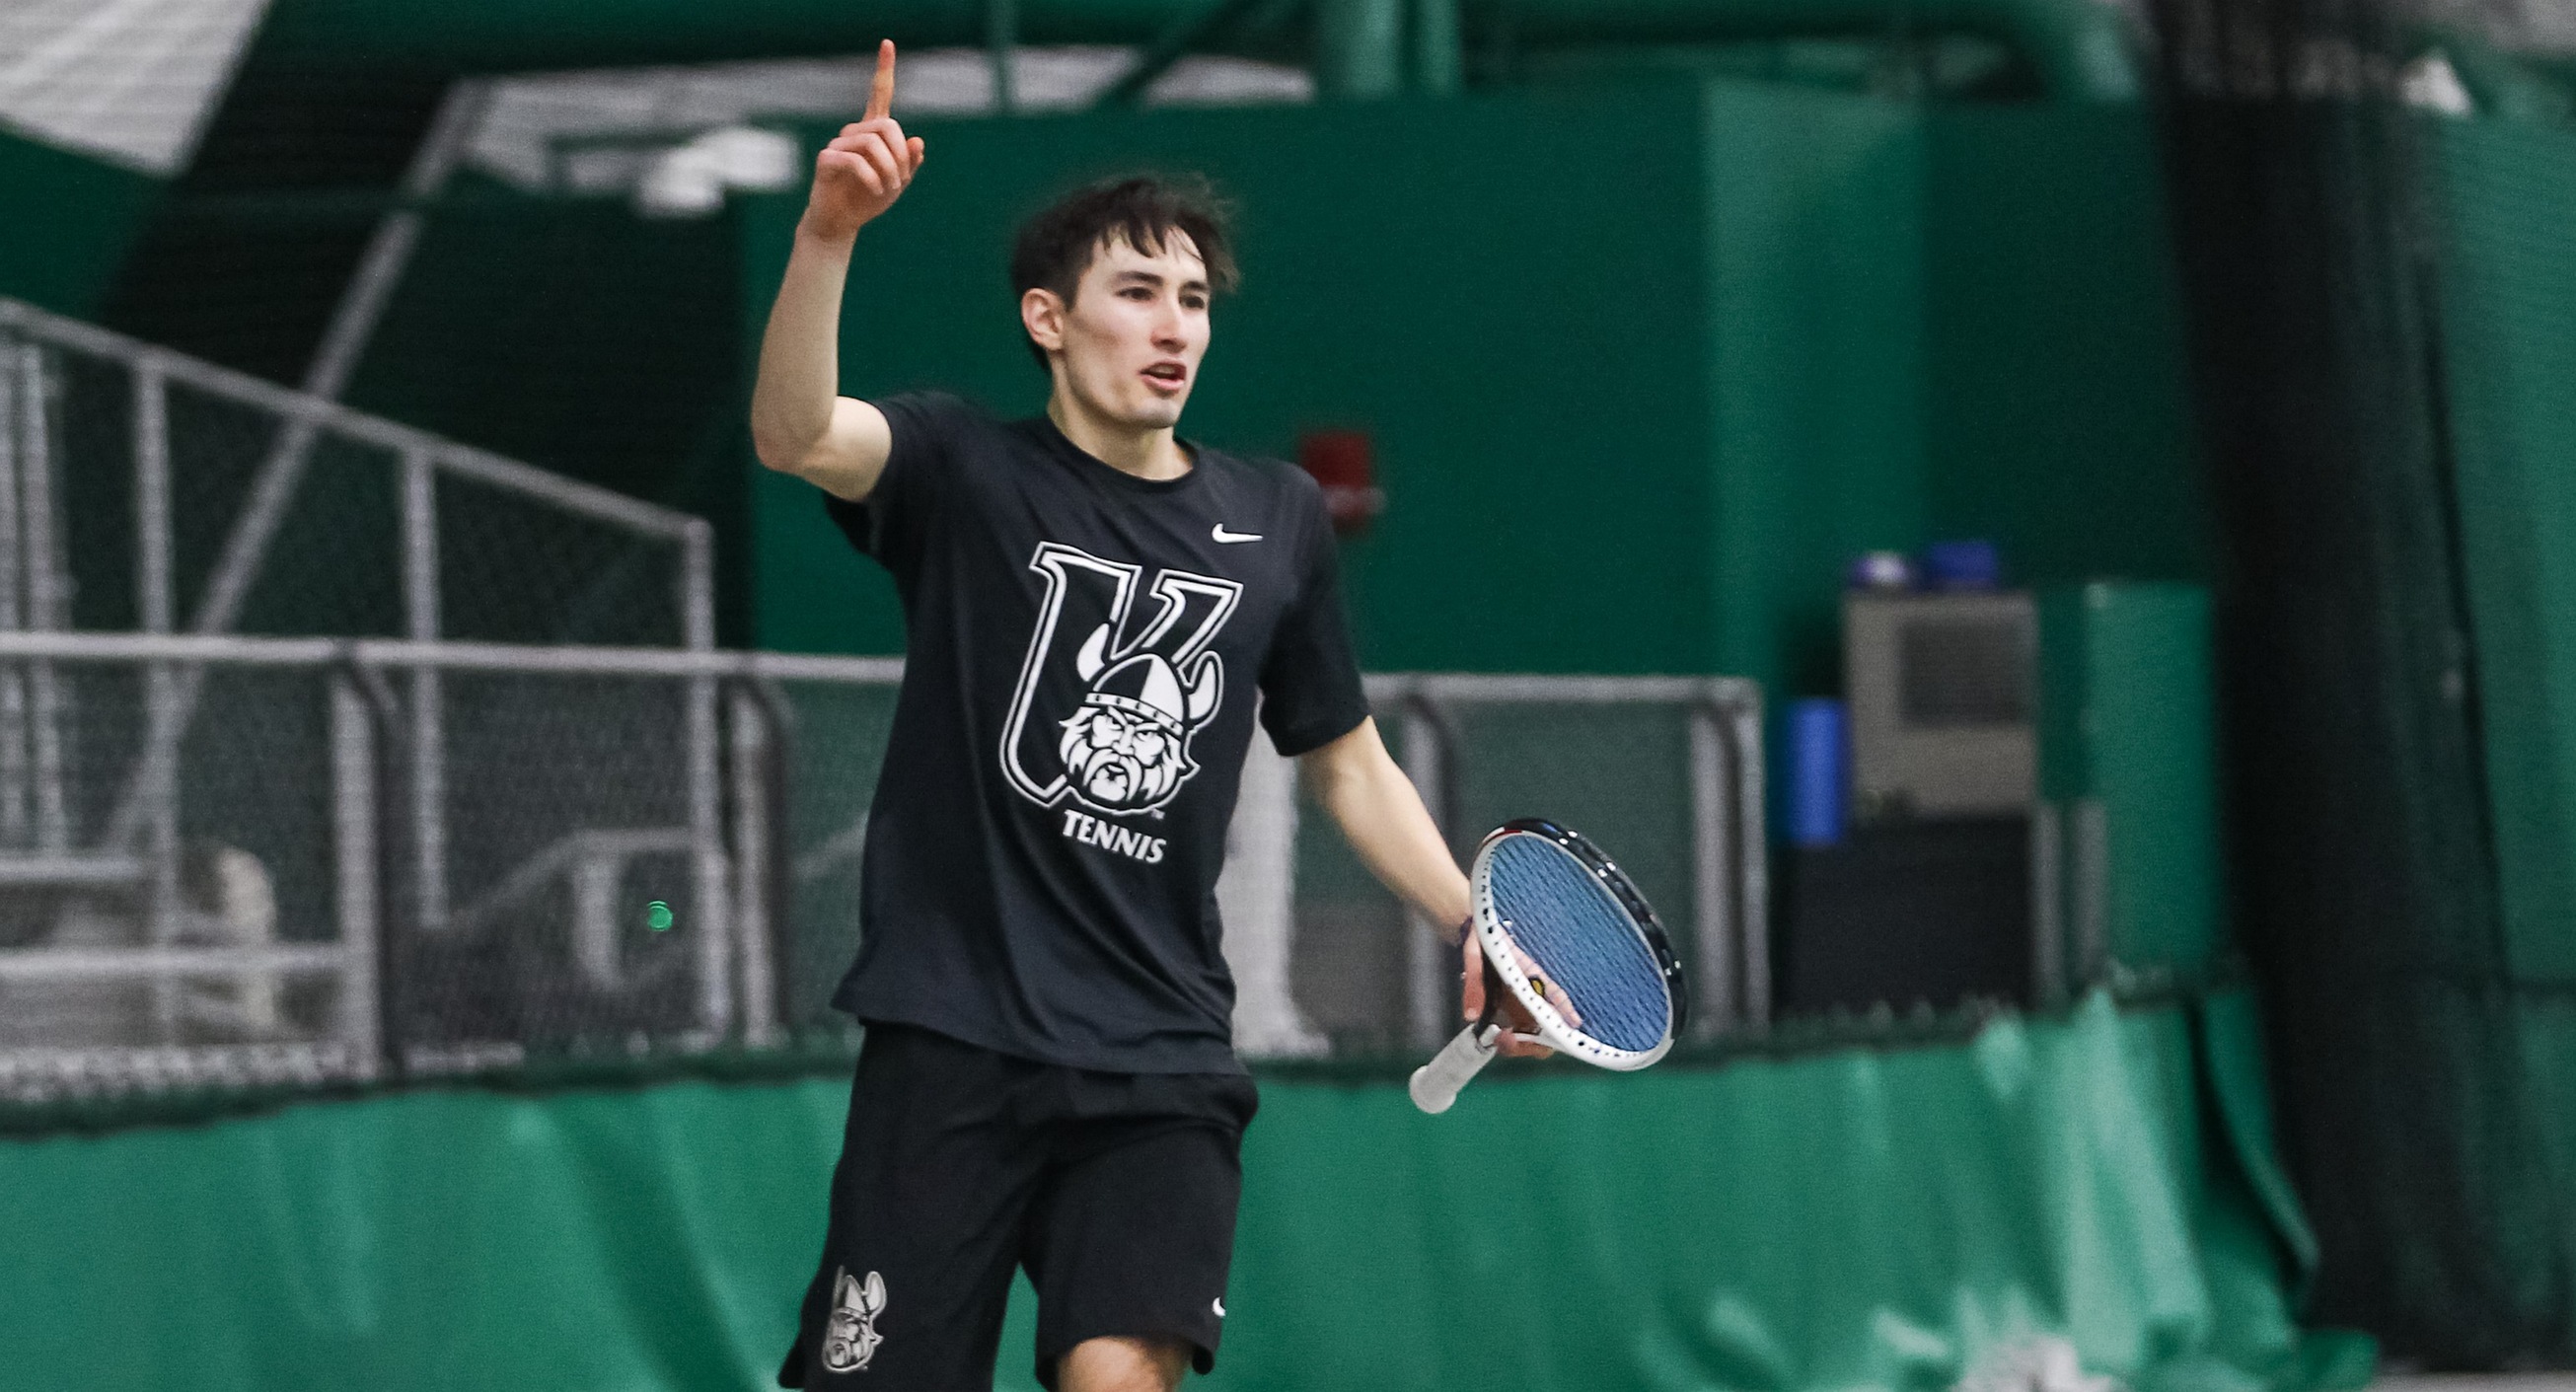 Cleveland State Men’s Tennis Has Four Earn All-League Honors